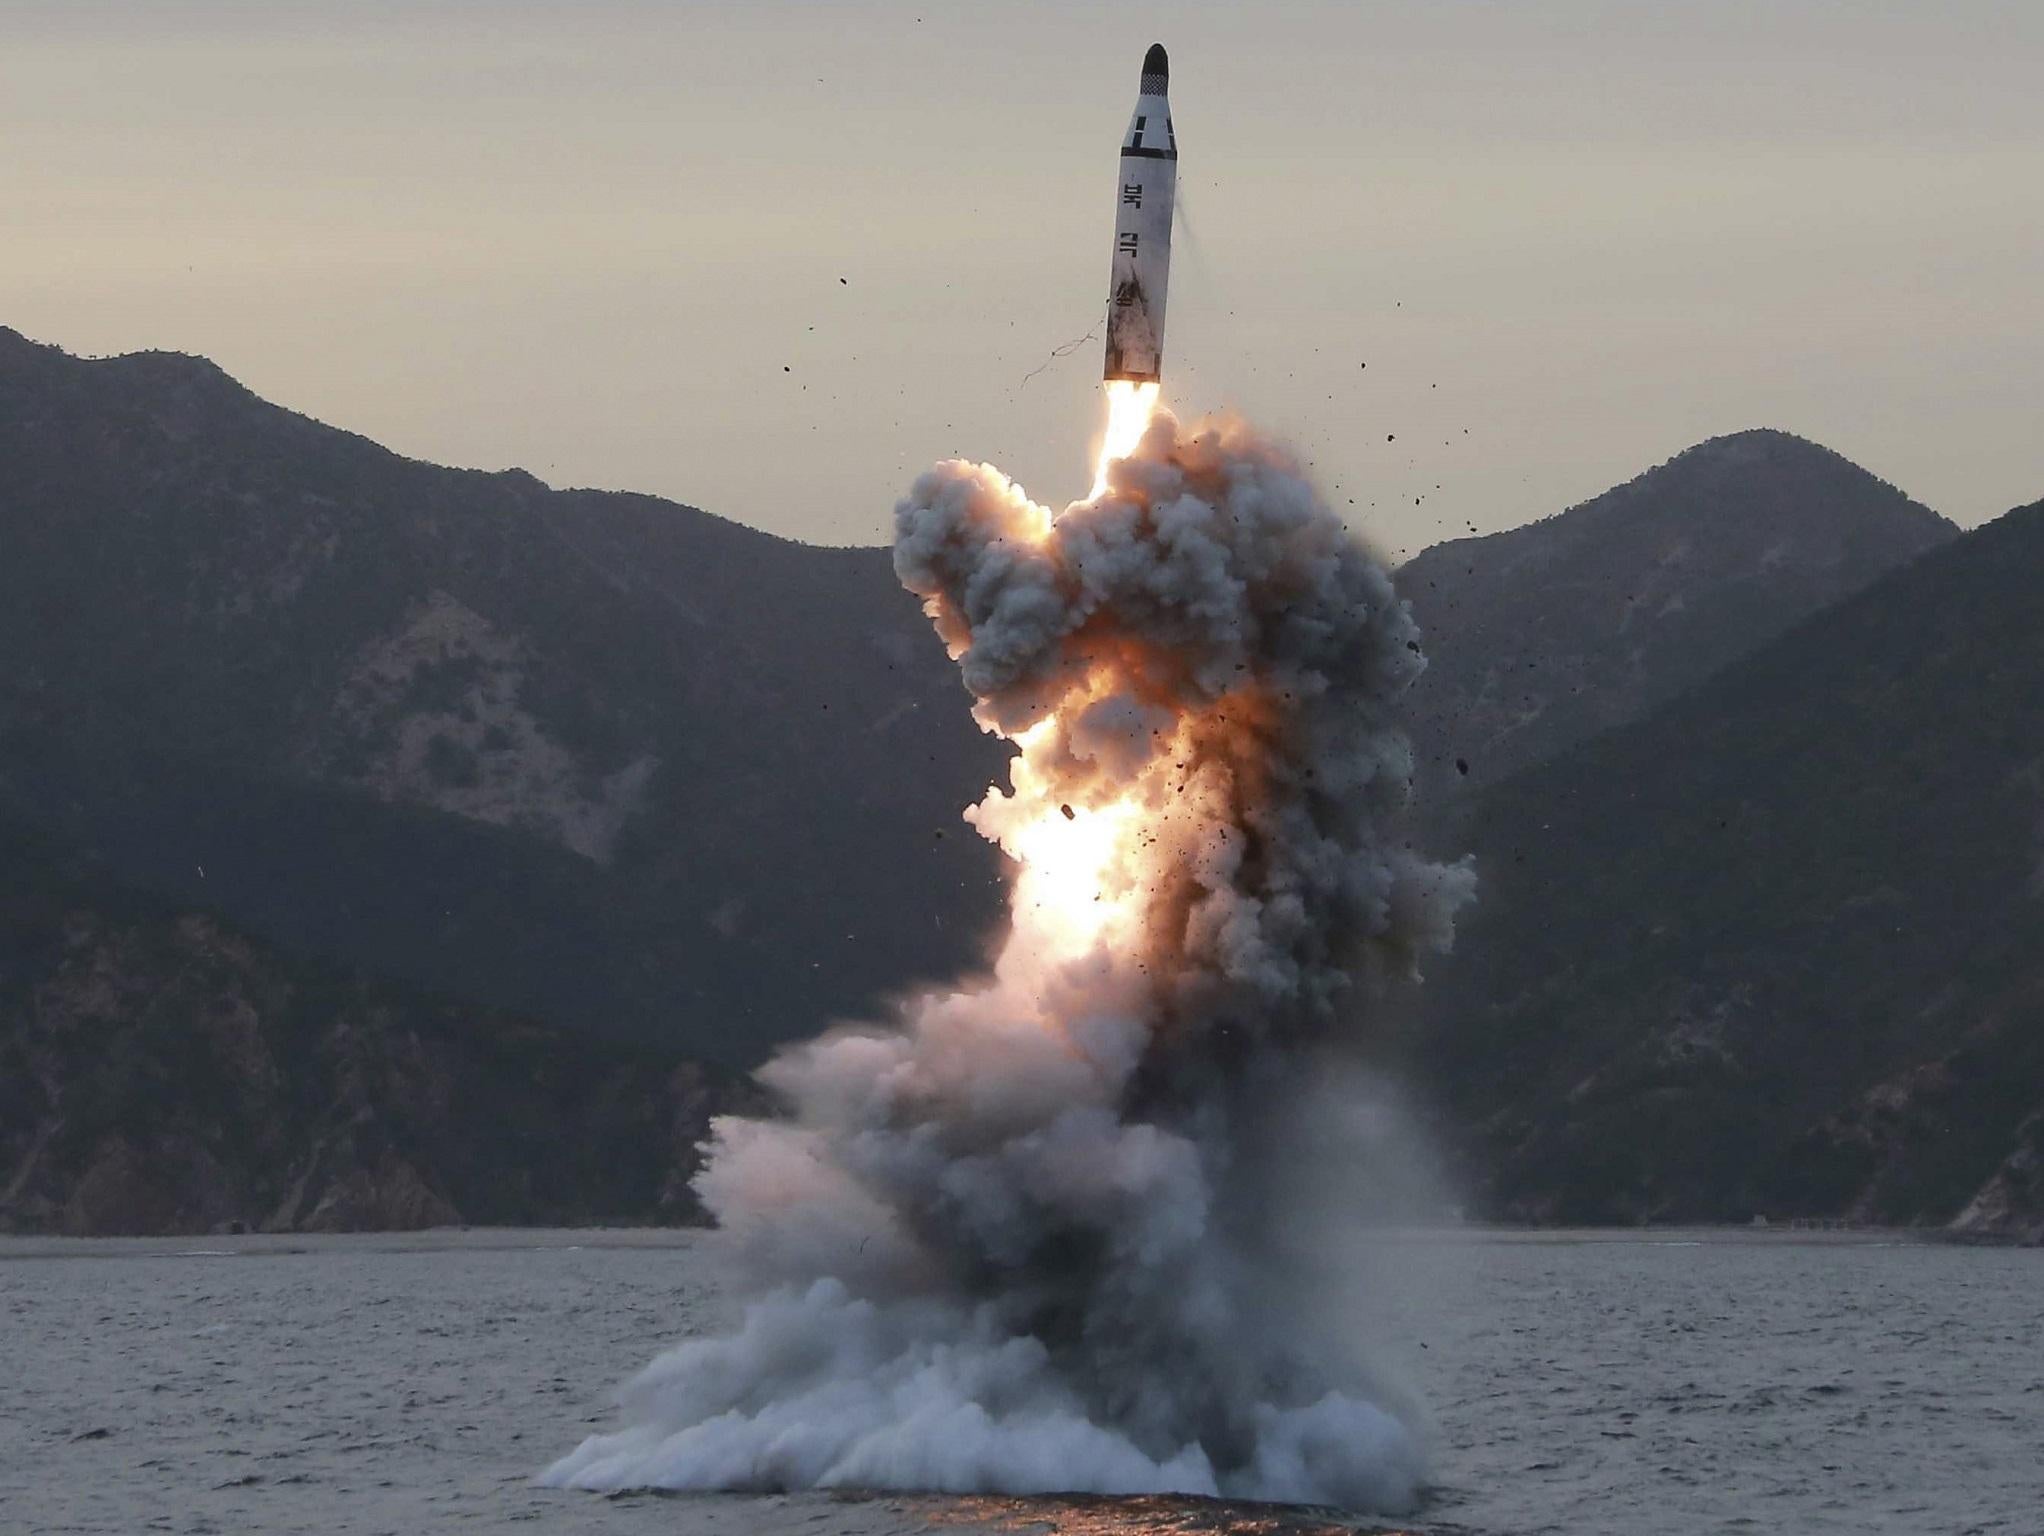 Four ballistic missiles were launched over 600 miles, with three of them landing in waters which Japan claims as its exclusive economic zone